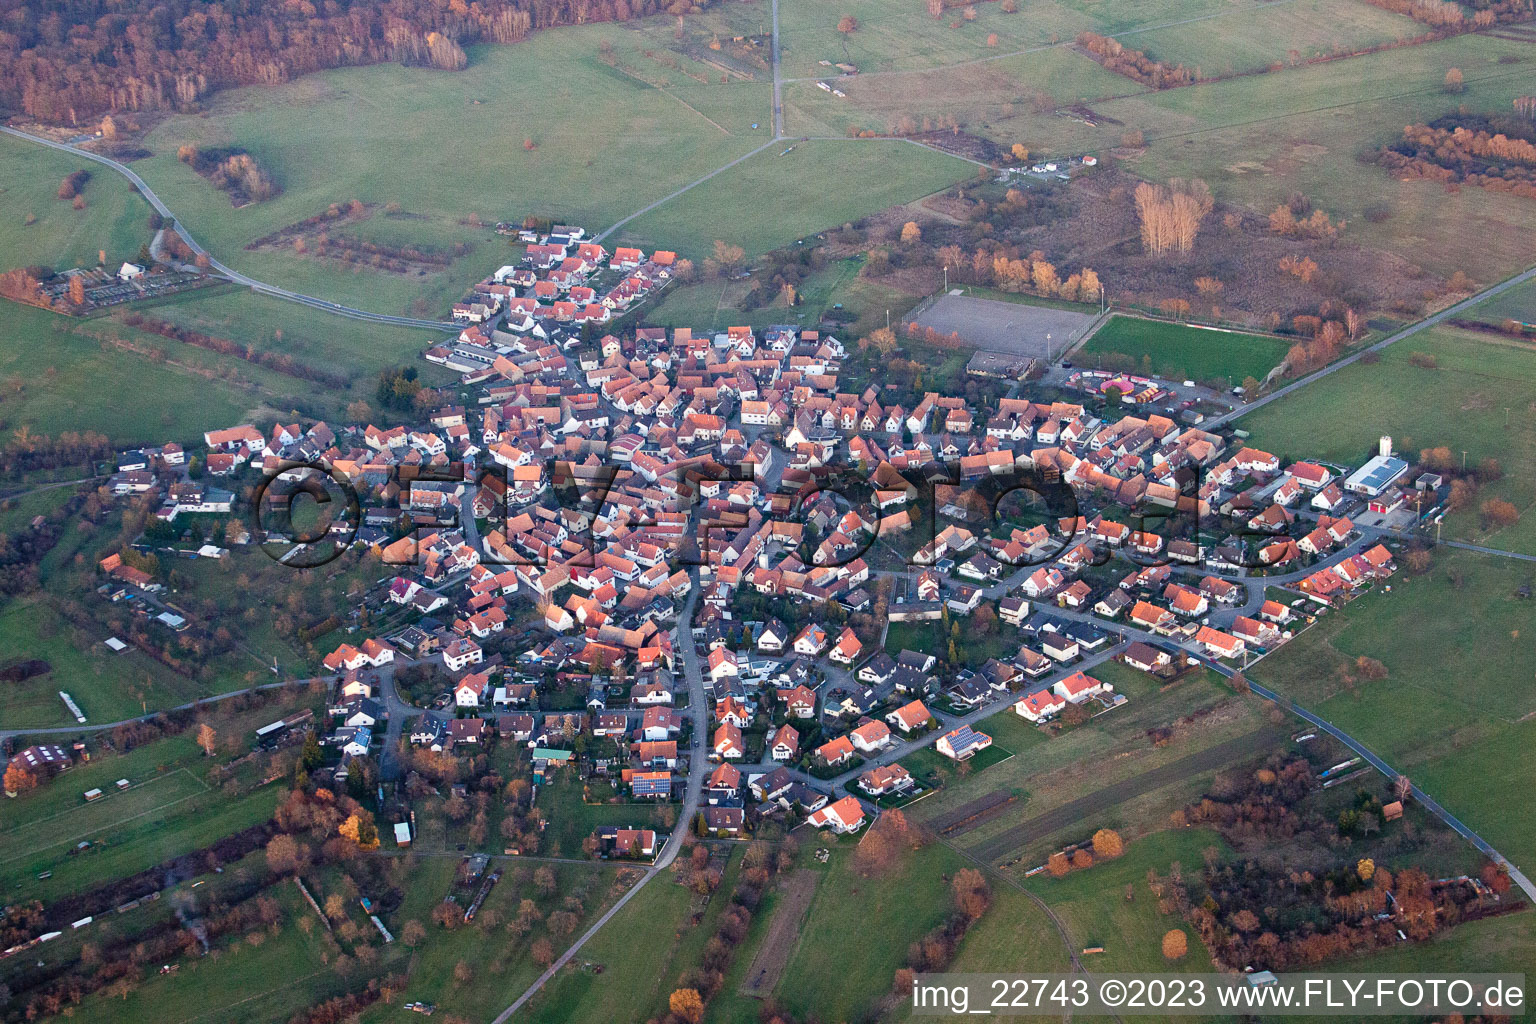 District Büchelberg in Wörth am Rhein in the state Rhineland-Palatinate, Germany seen from a drone